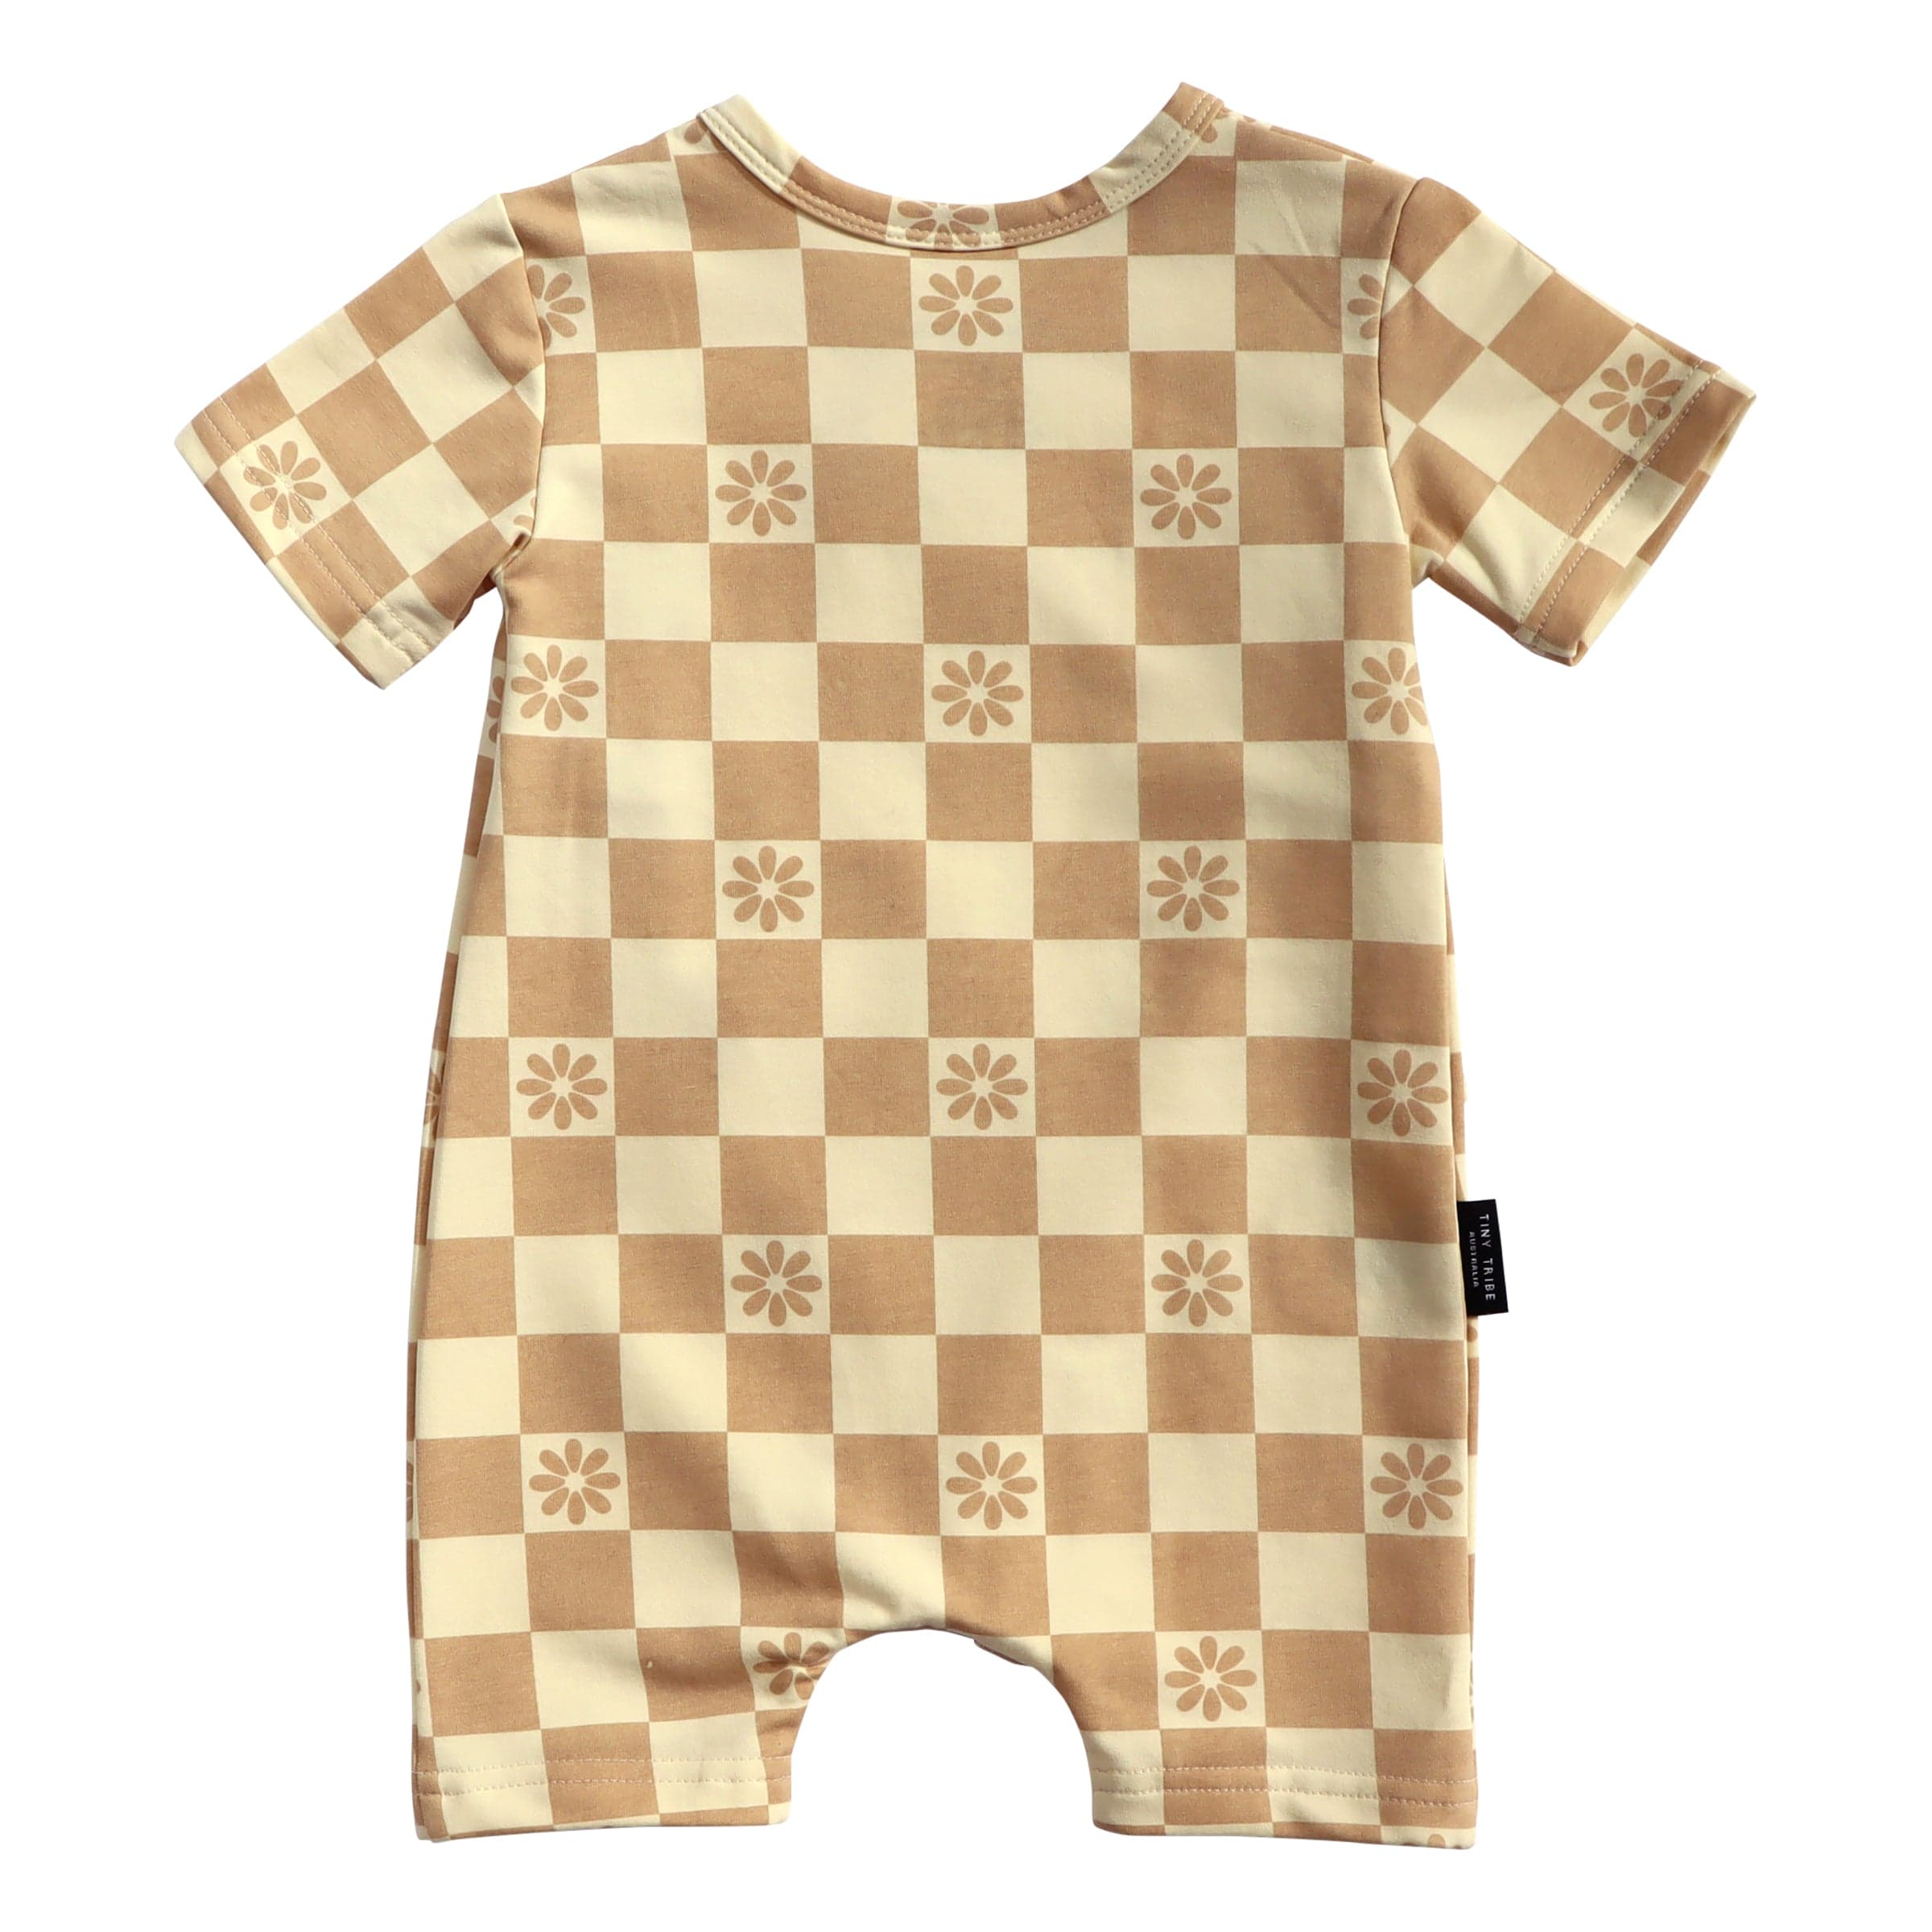 Tiny Tribe Girls All In One Daisy Check Cross Over Romper